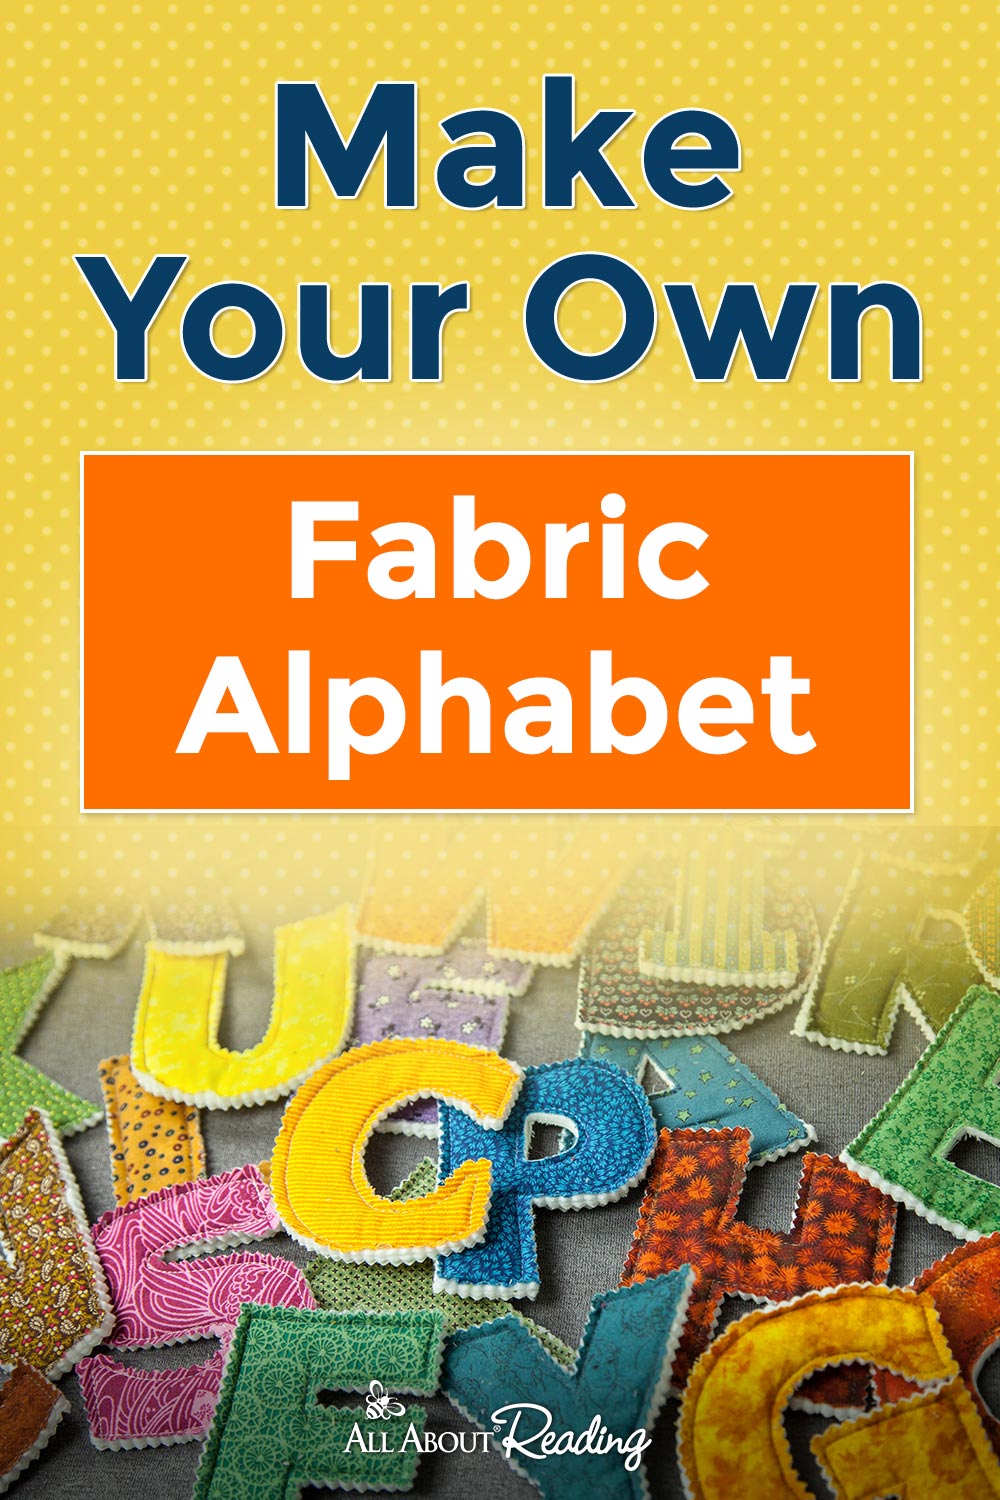 Download Make Your Own Fabric Alphabet Free Template